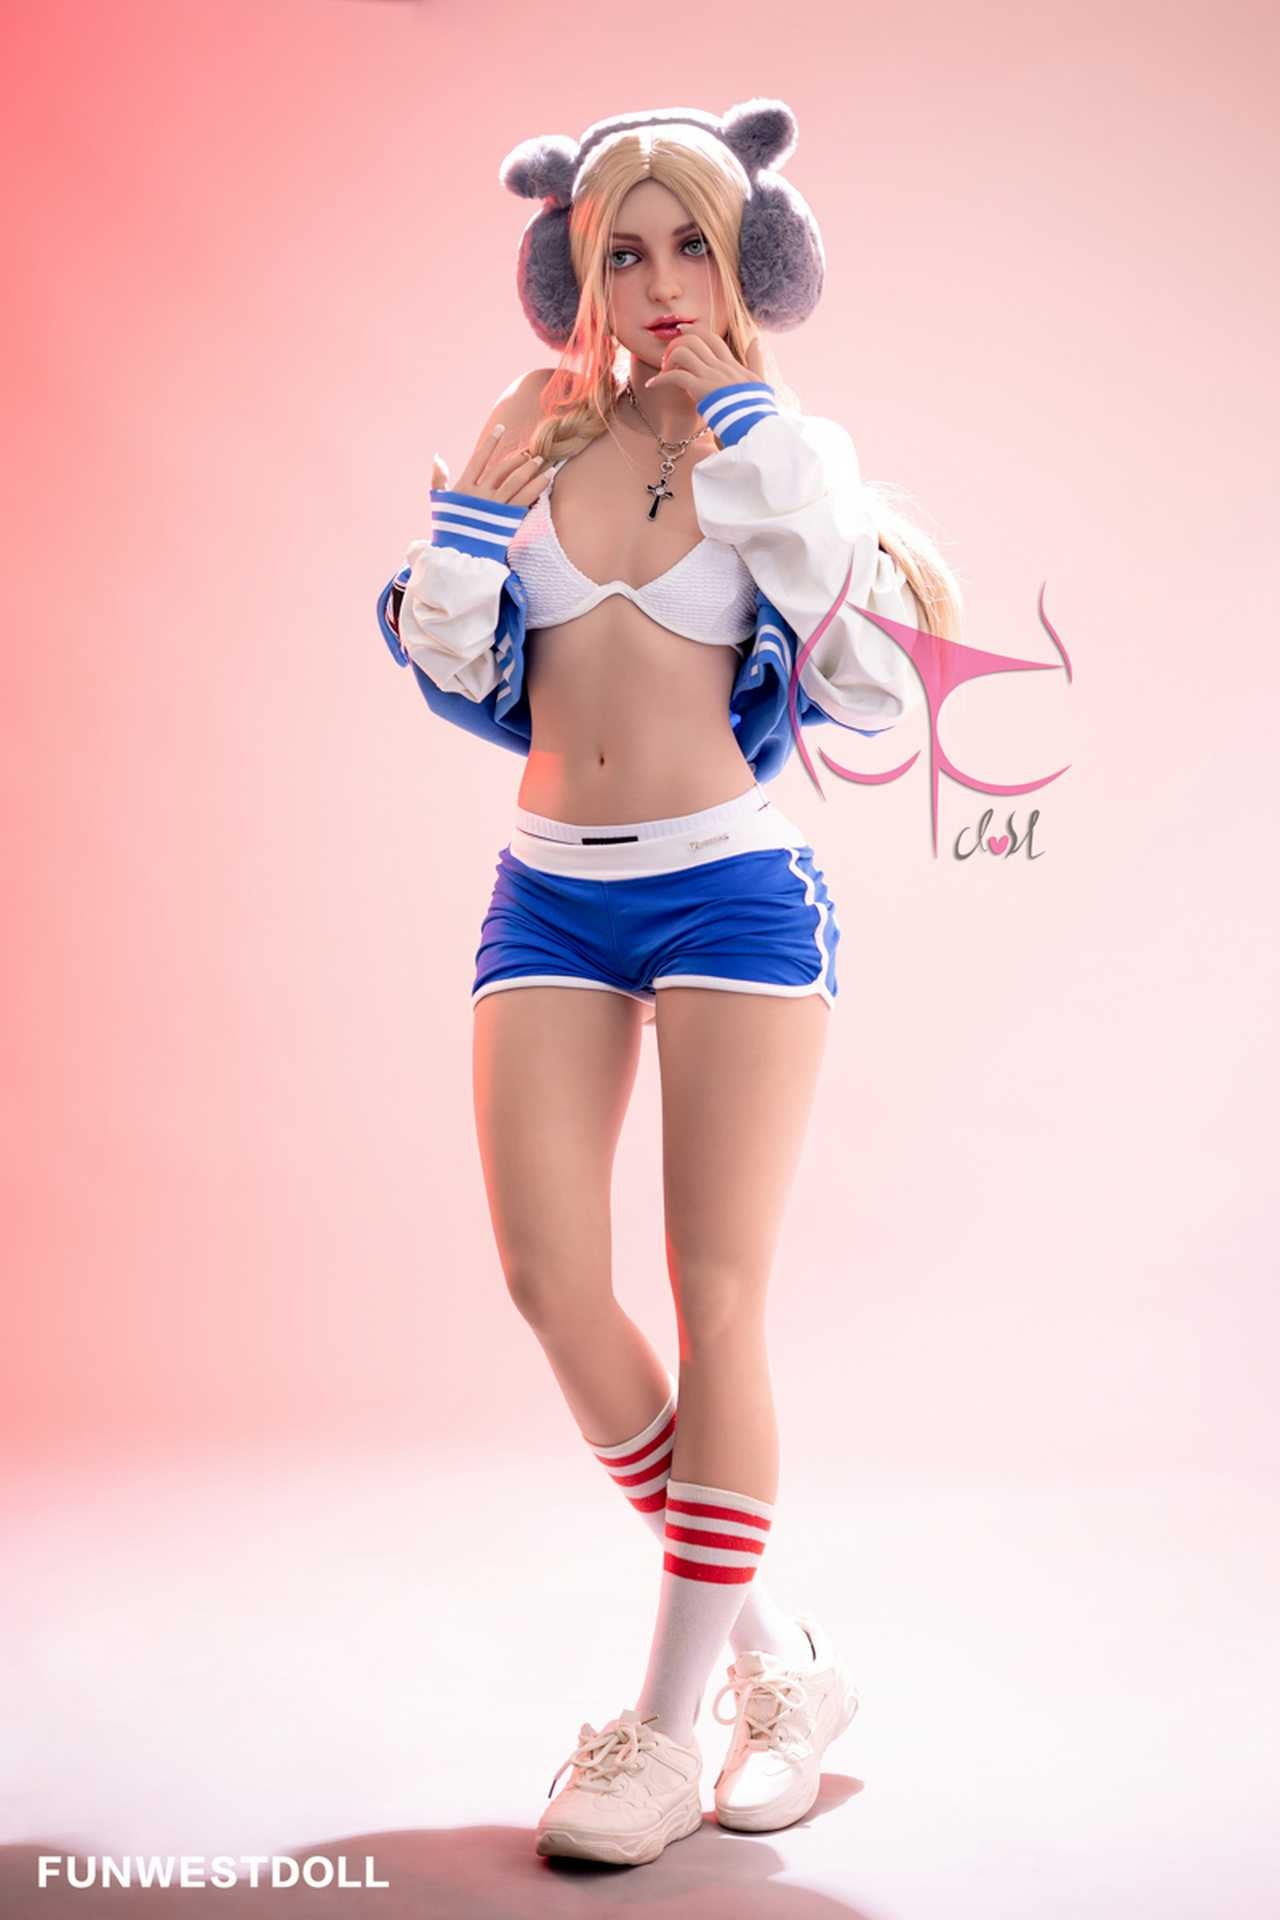 Funwest Luann: 159cm TPE Doll with A-Cup Breasts, Hot Body, and Blue Training Outfit